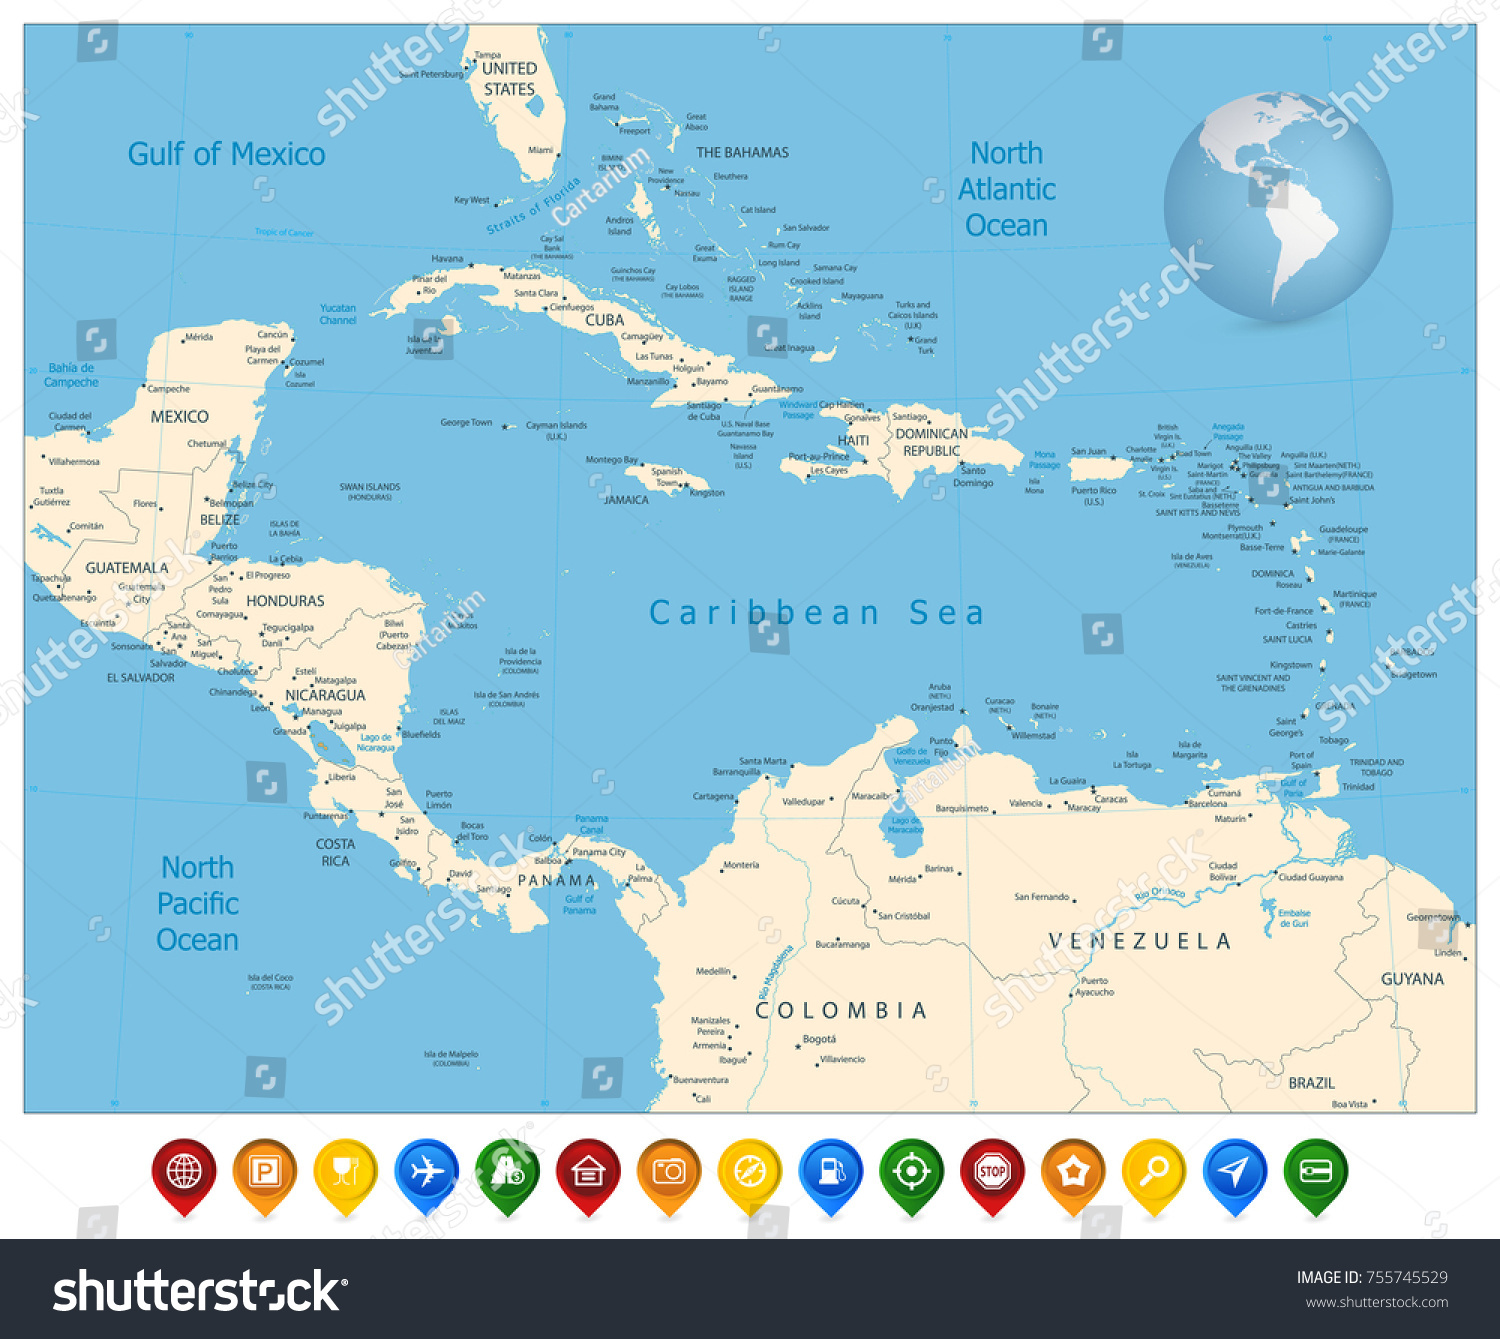 Political Map of the Caribbean and colorful map markers #755745529